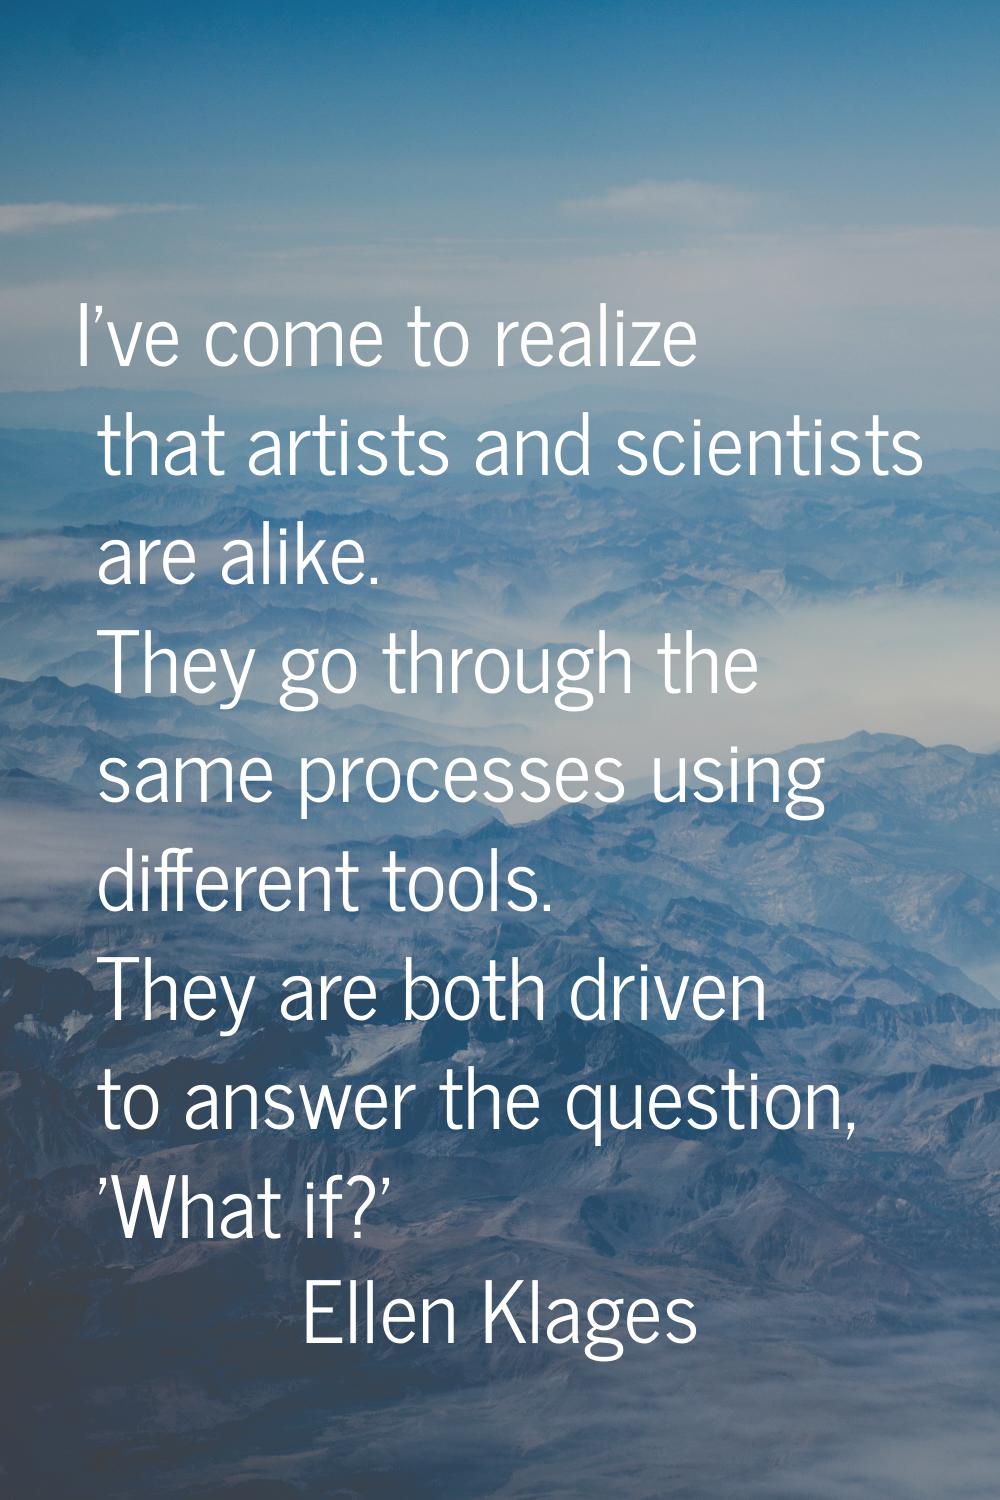 I've come to realize that artists and scientists are alike. They go through the same processes usin